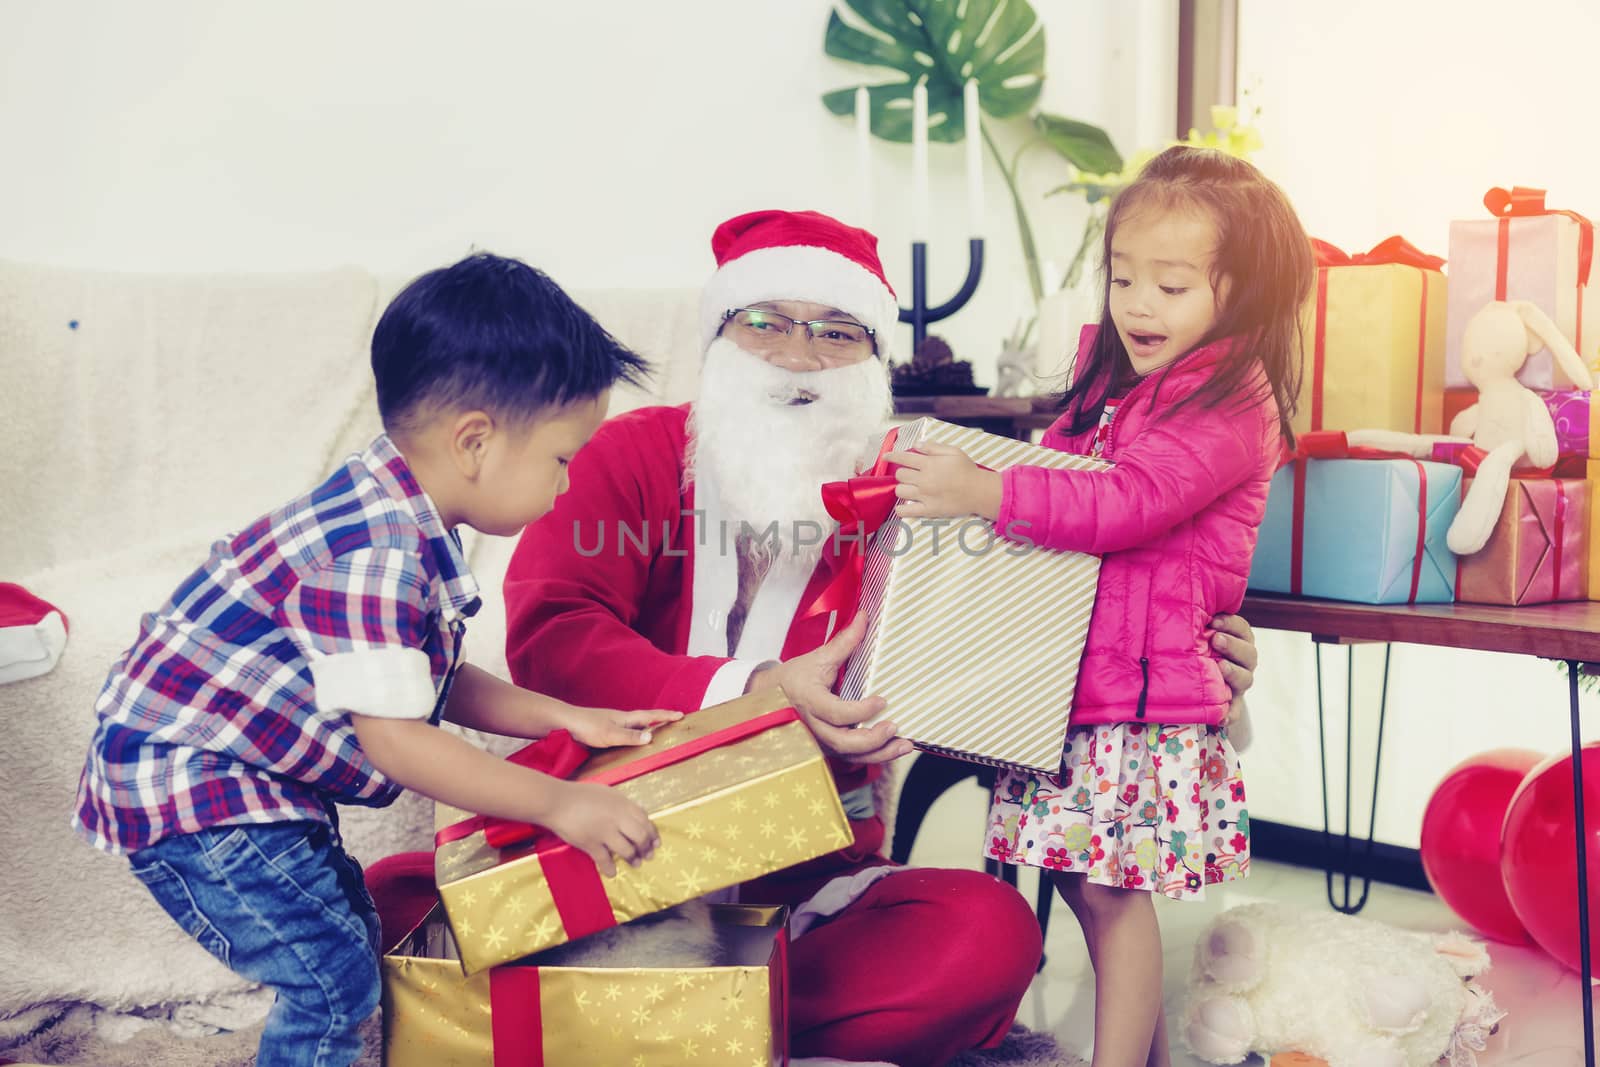 Santa Claus gives gifts to girls and boys during the Christmas s by numberone9018